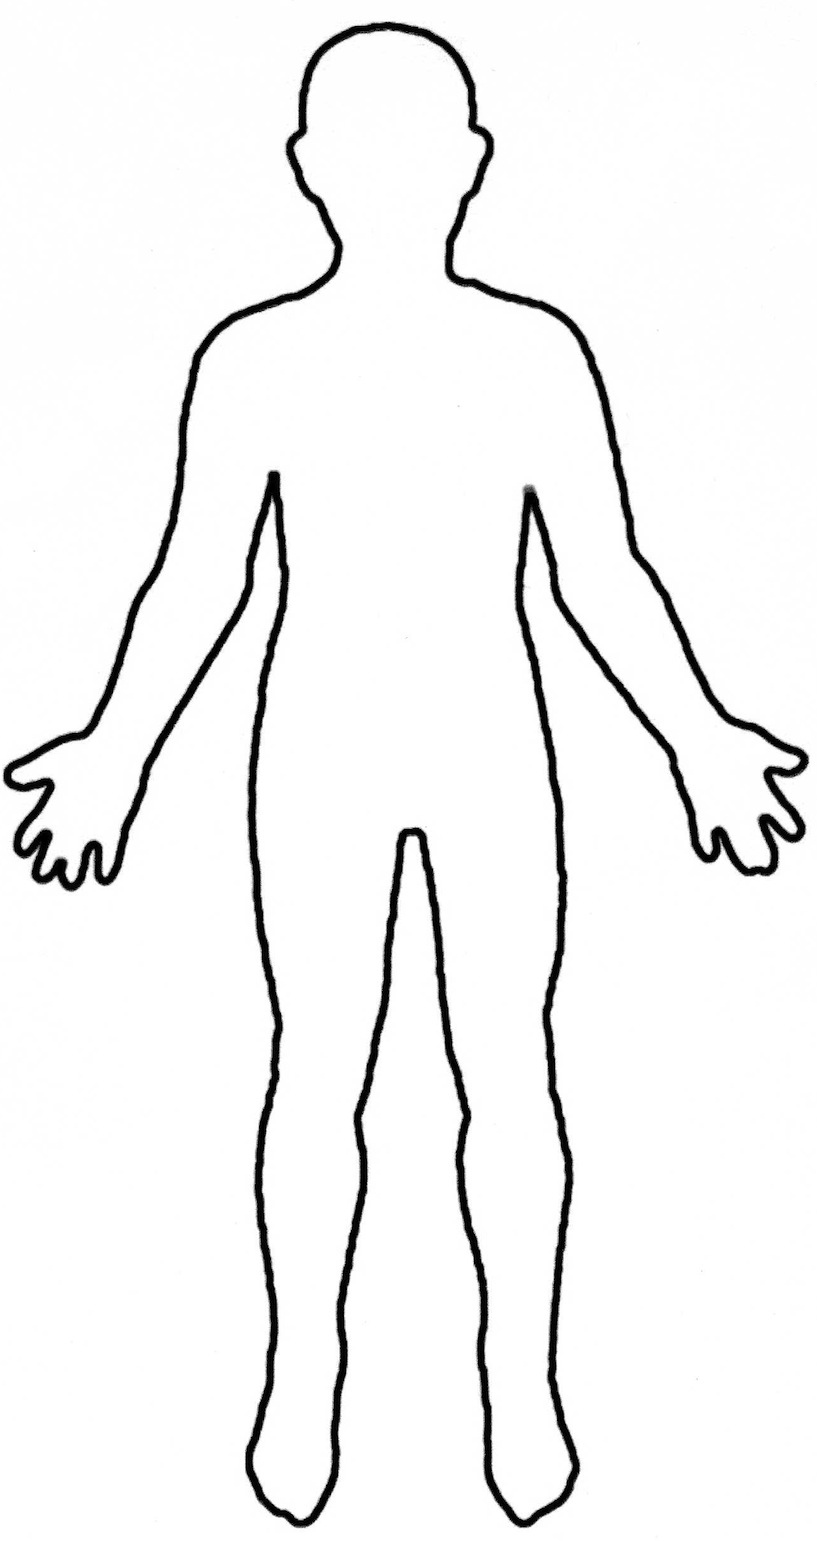 Human Body Outline Printable Free download best Human Body Outline